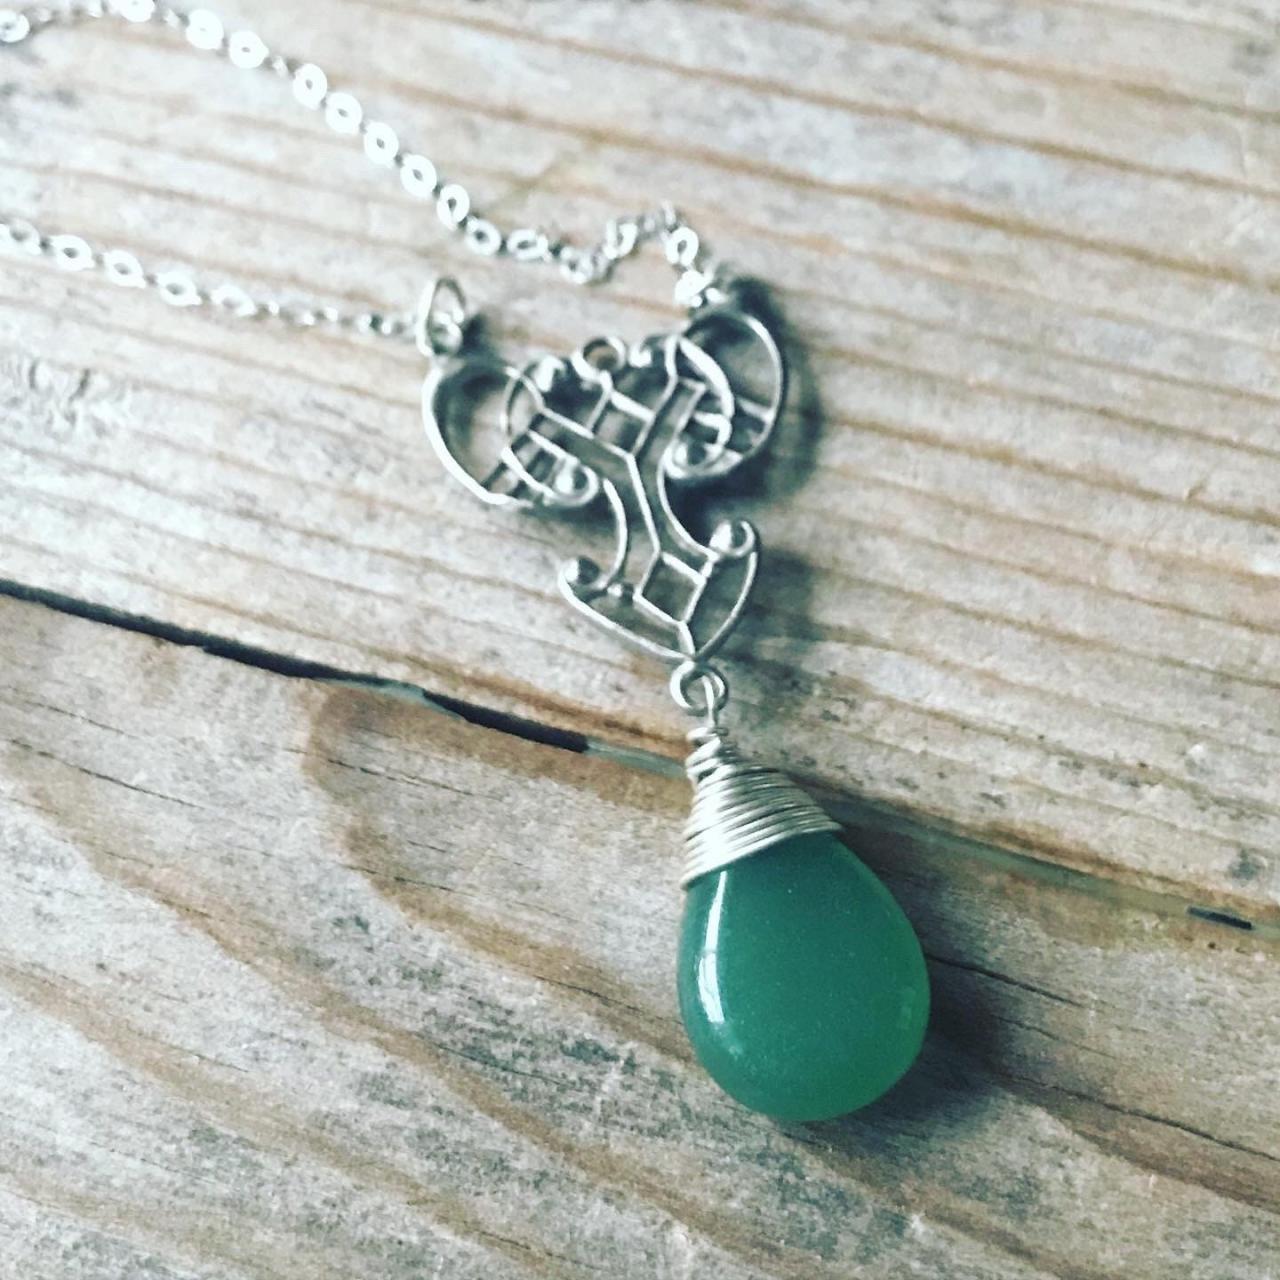 Art Nouveau Necklace With Green Jade. Sterling Wire Wrapped Weddings Holiday Jewelry Vintage Style Gemstone Gifts Under 50.